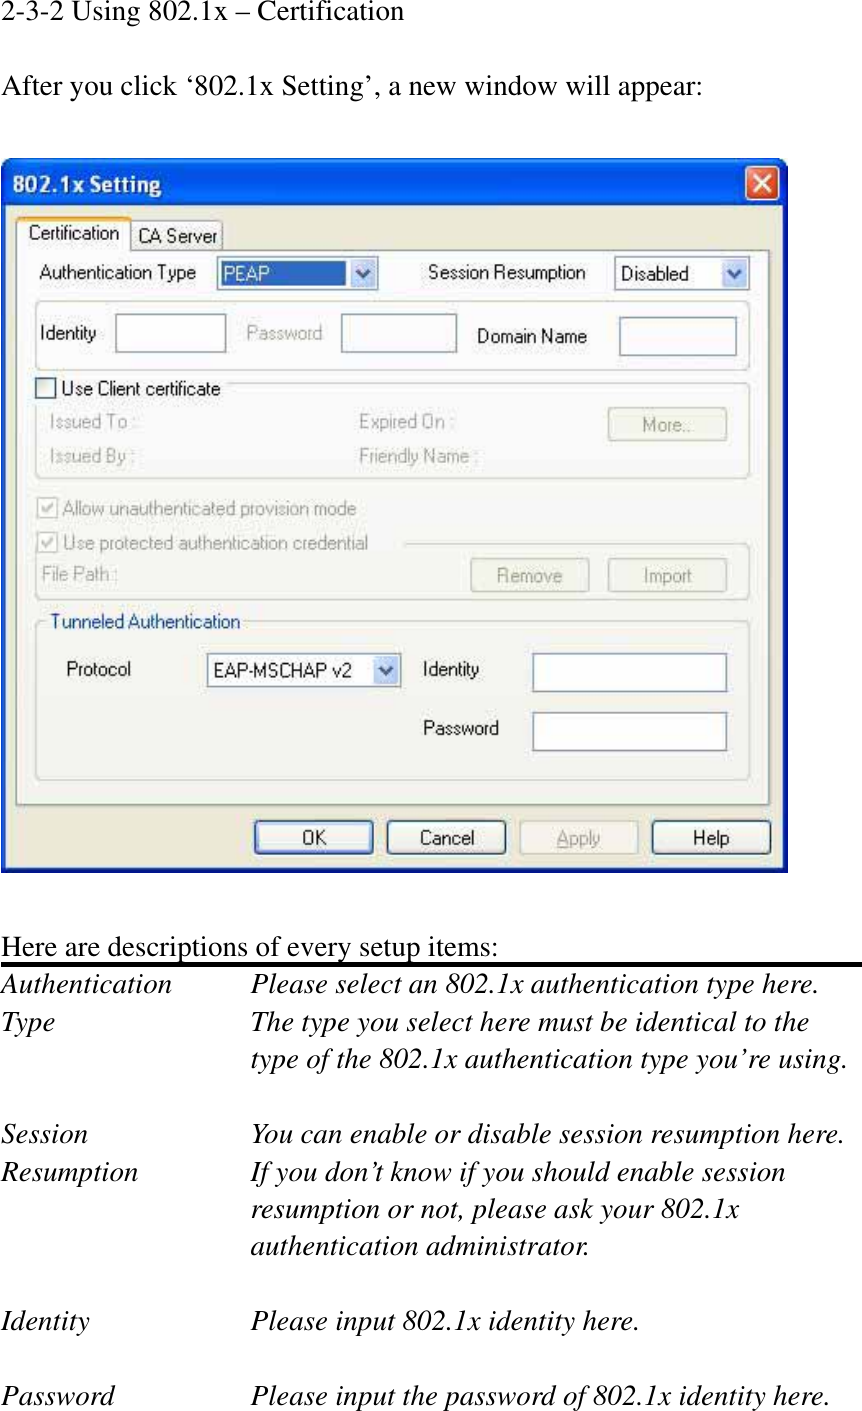 2-3-2 Using 802.1x – Certification After you click ‘802.1x Setting’, a new window will appear: Here are descriptions of every setup items: Authentication    Please select an 802.1x authentication type here. Type        The type you select here must be identical to the type of the 802.1x authentication type you’re using. Session        You can enable or disable session resumption here. Resumption  If you don’t know if you should enable session resumption or not, please ask your 802.1x authentication administrator. Identity  Please input 802.1x identity here. Password  Please input the password of 802.1x identity here. 